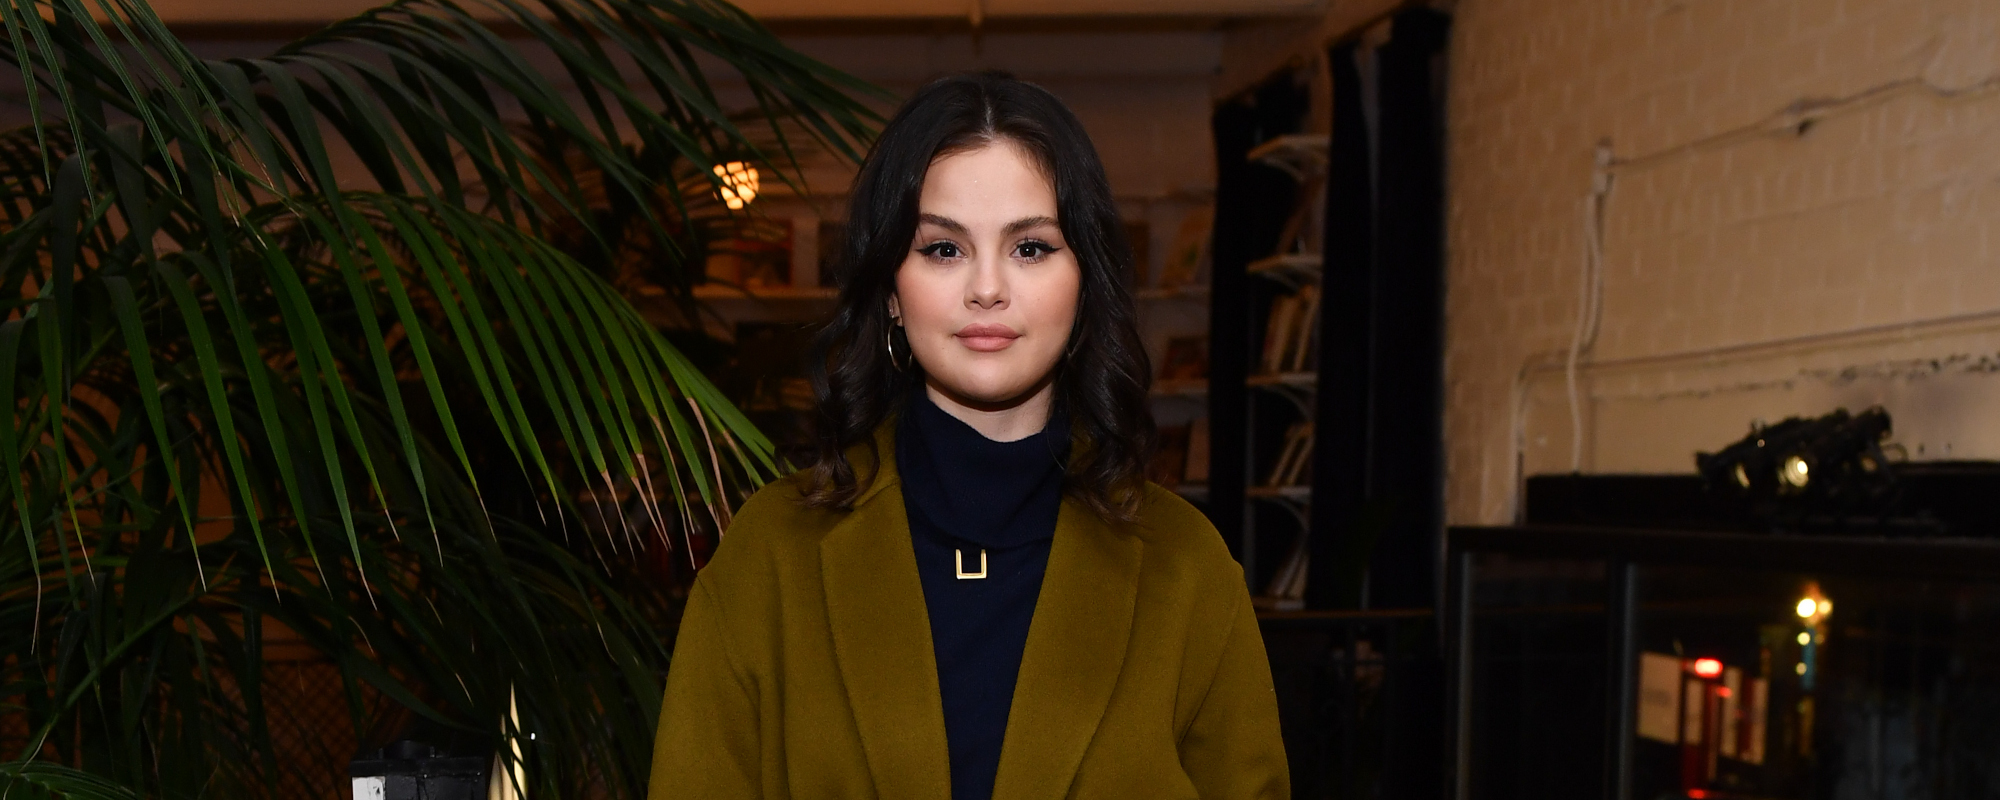 5 Things to Know About Selena Gomez